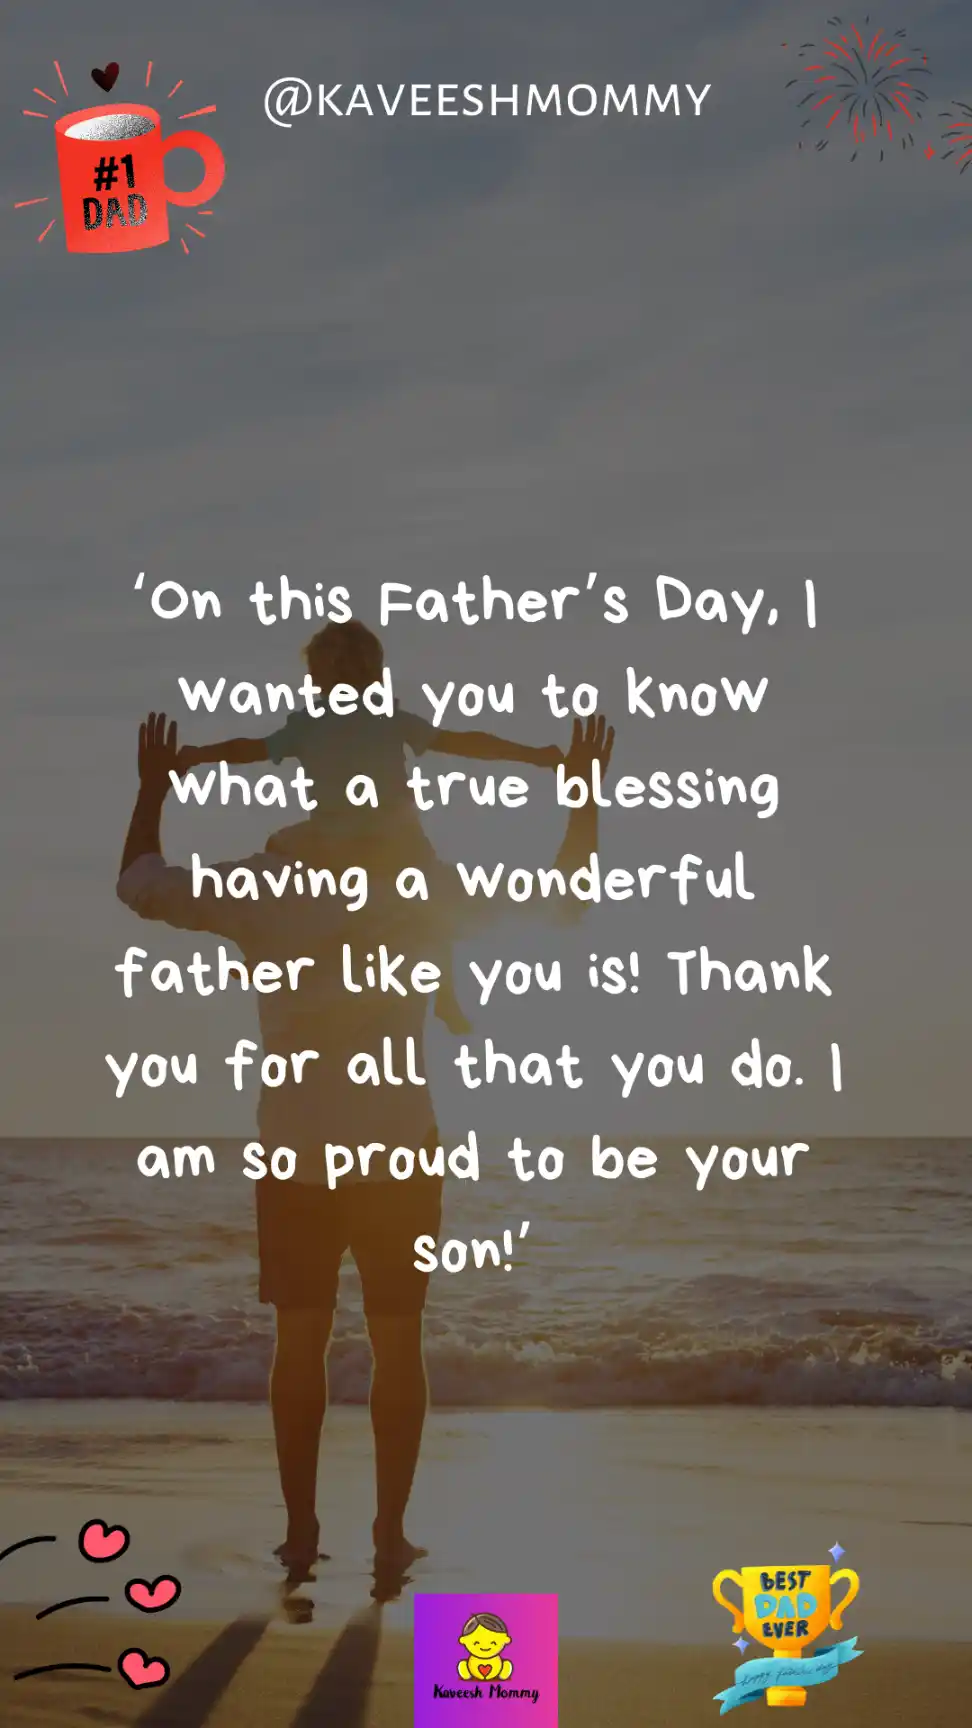 happy fathers day quotes from son-‘On this Father’s Day, I wanted you to know what a true blessing having a wonderful father like you is! Thank you for all that you do. I am so proud to be your son!